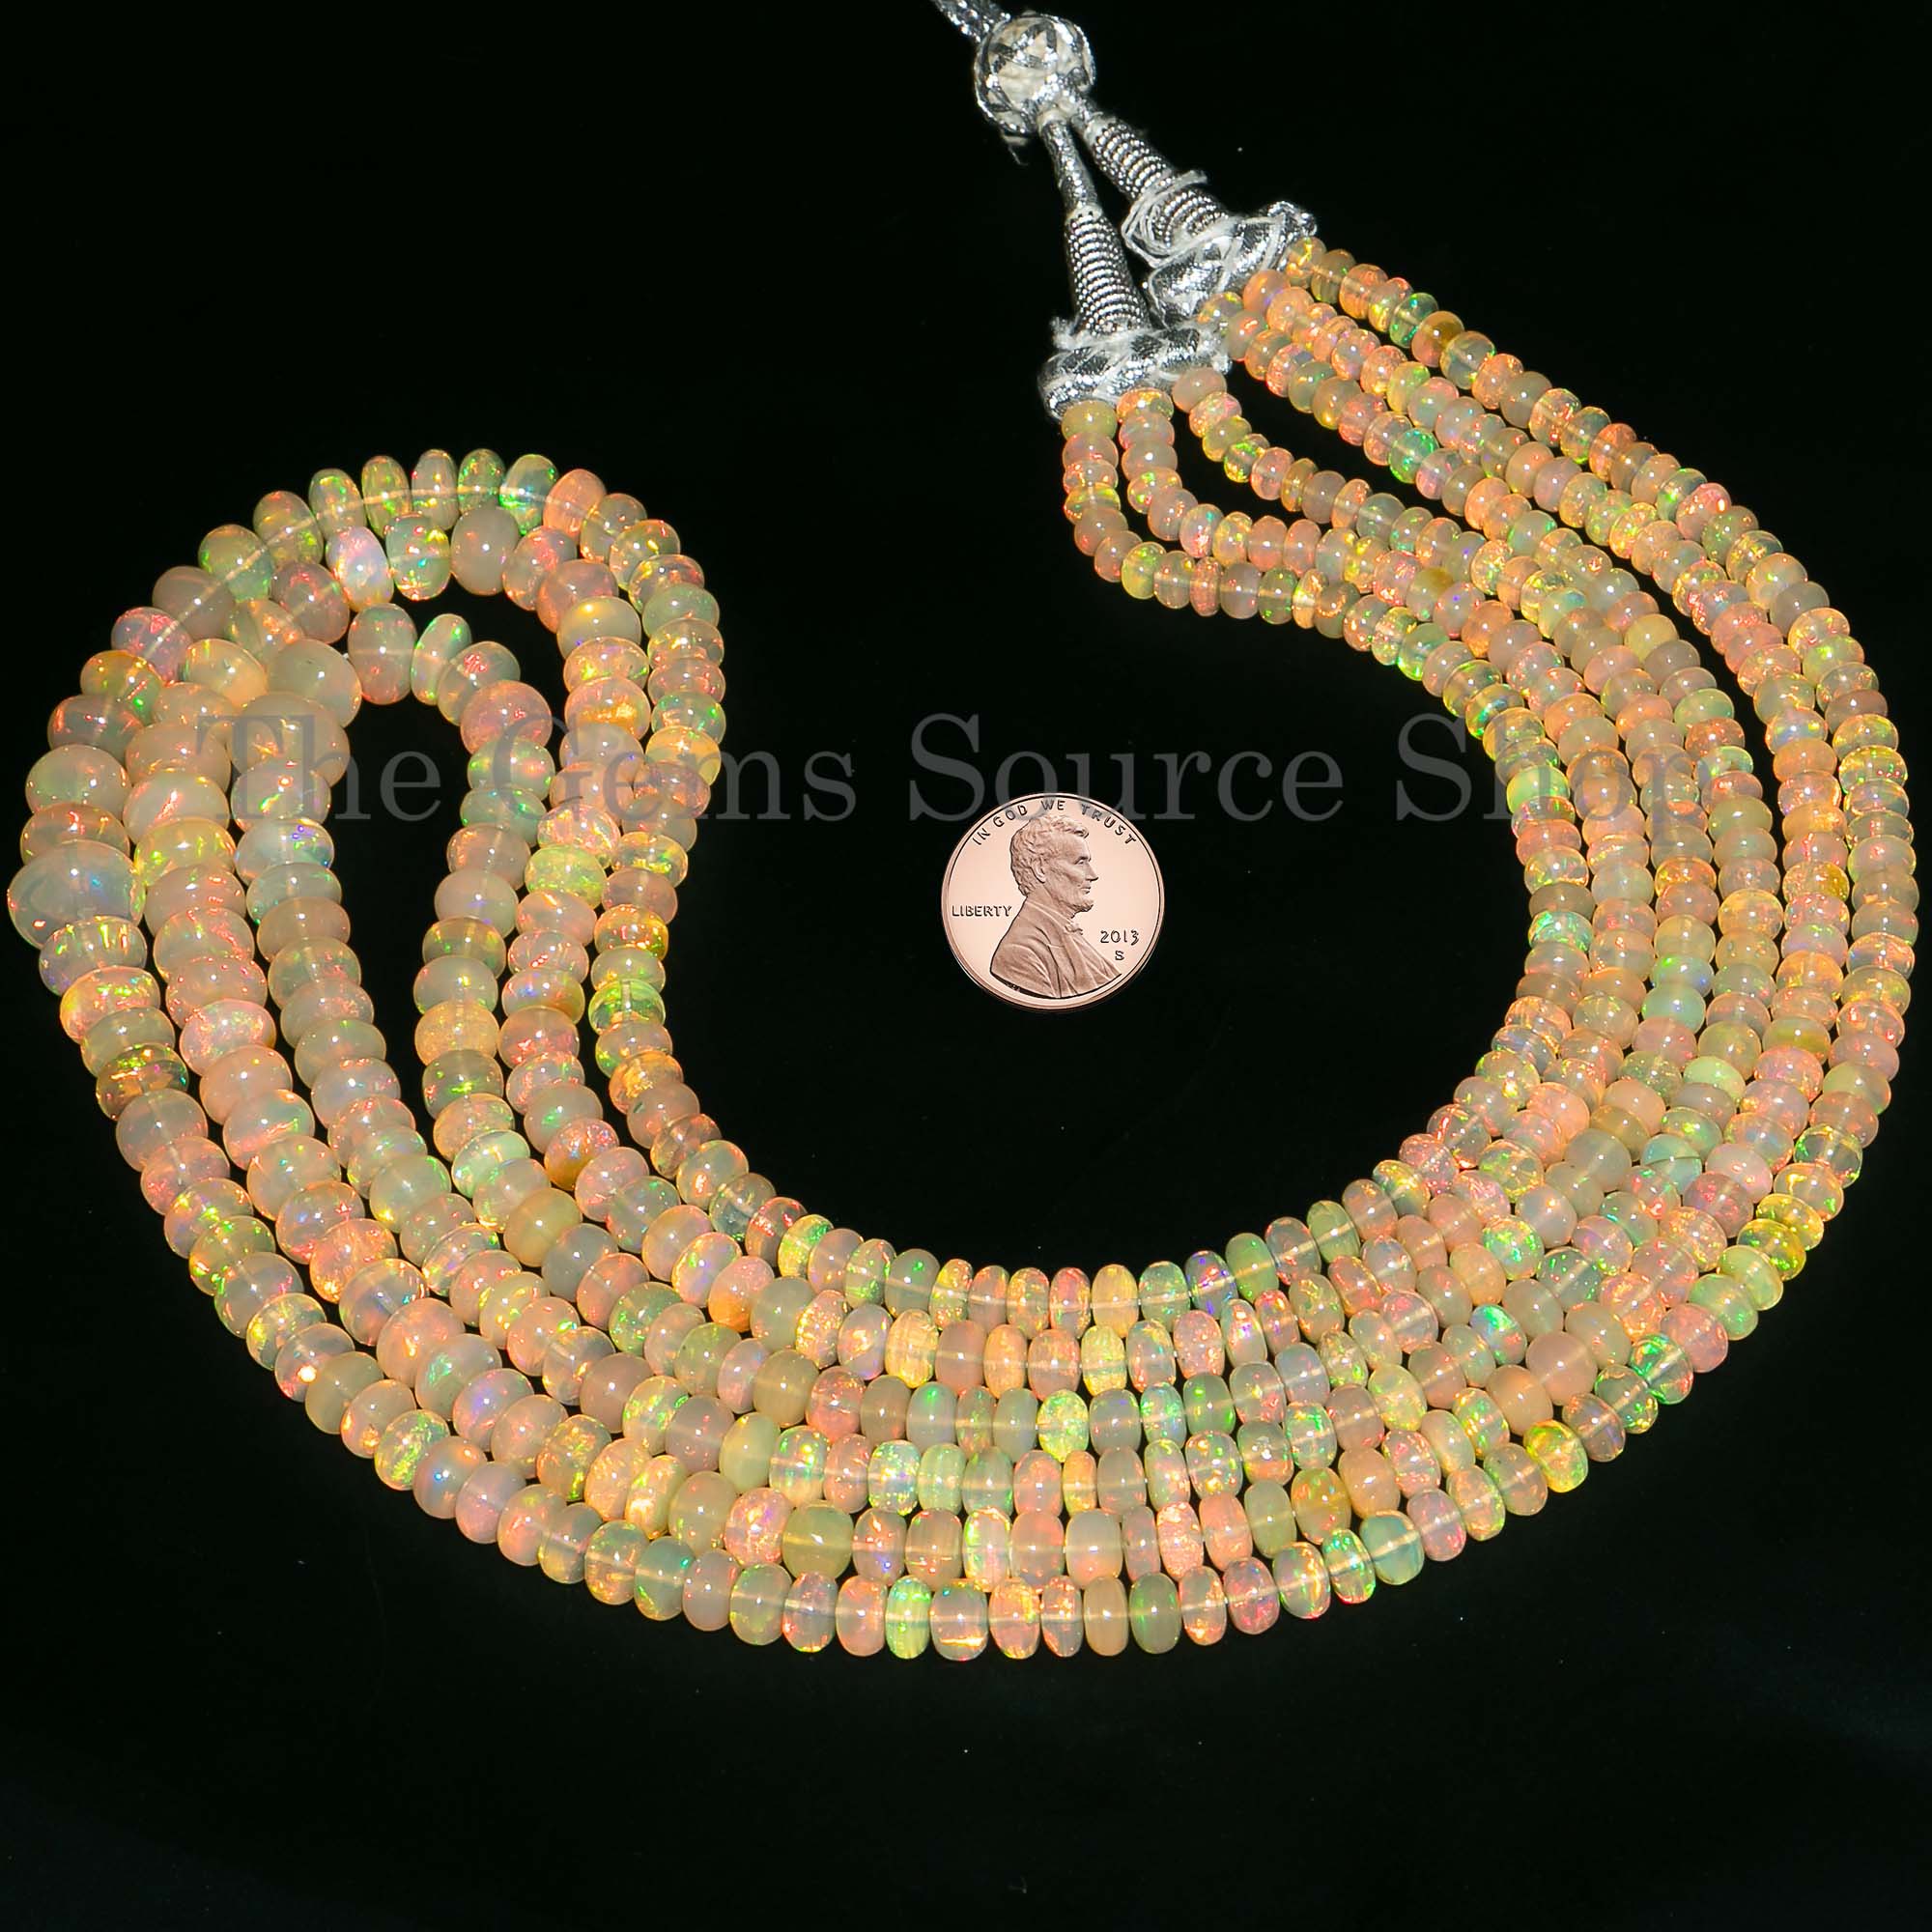 Ethiopian Opal Beads Necklace, 5-9mm Natural Ethiopian Opal Rondelle Necklace, Gemstone Necklace